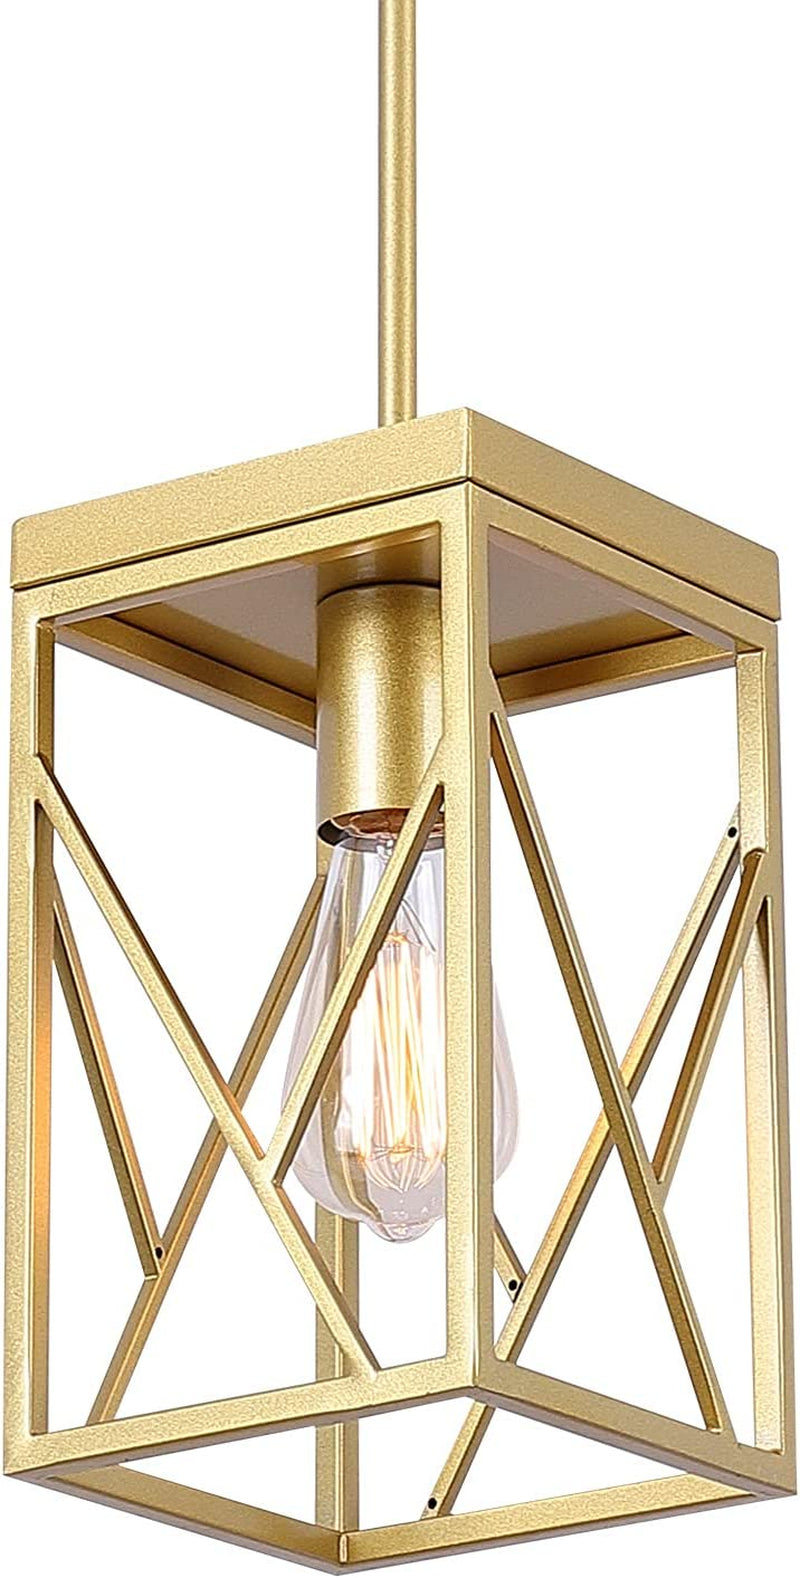 Fivess Lighting Modern Gold Pendant Light with Metal Cage, One-Light Adjustable Rods Mini Pendant Lighting Fixture for Kitchen Island Cafe Bar Farmhouse